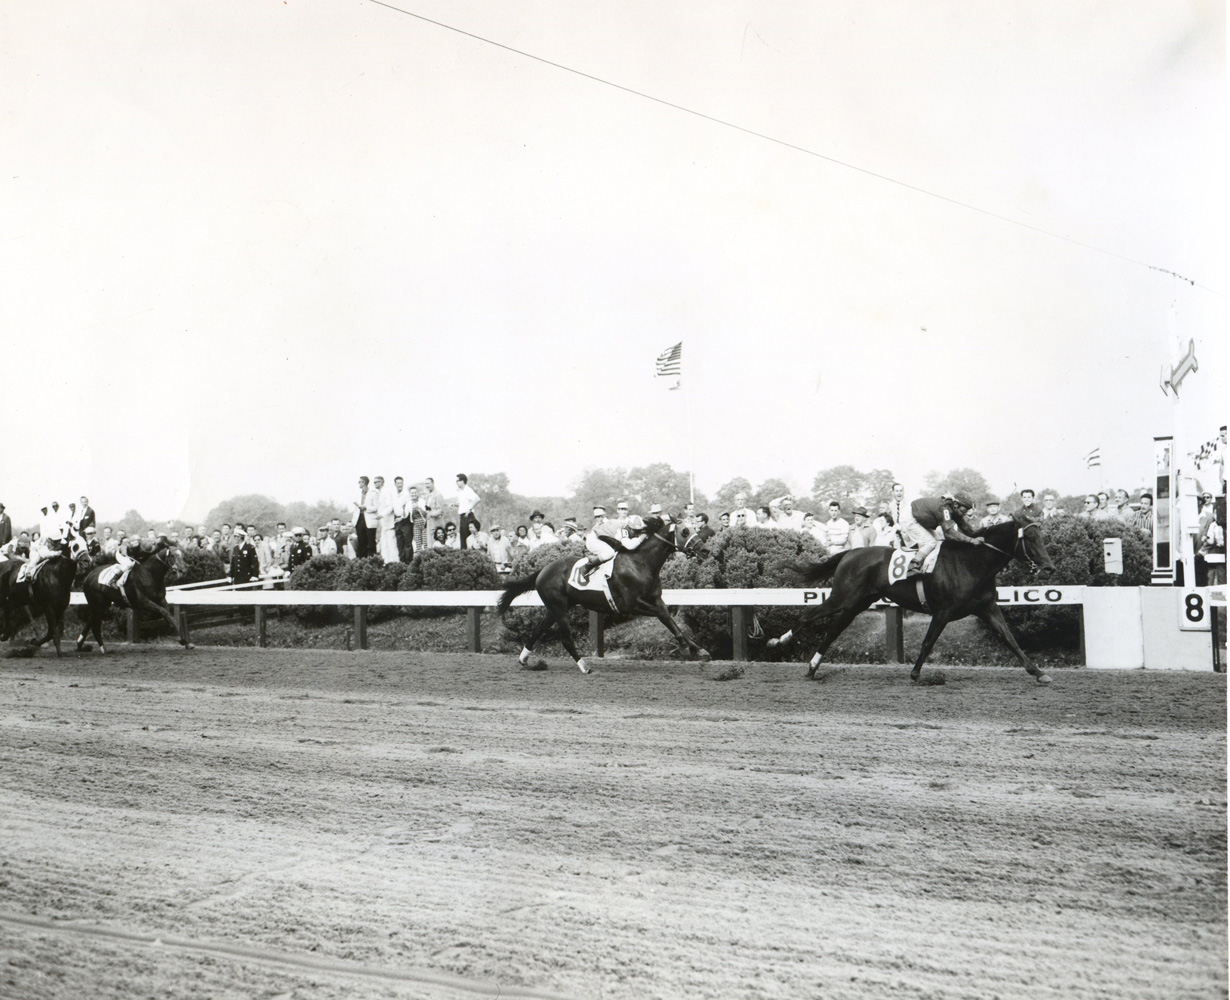 Tim Tam (Ismael Valenzuela up) winning the 1958 Preakness at Pimlico (Pimlico Photo/Jerry Frutkoff /Museum Collection)